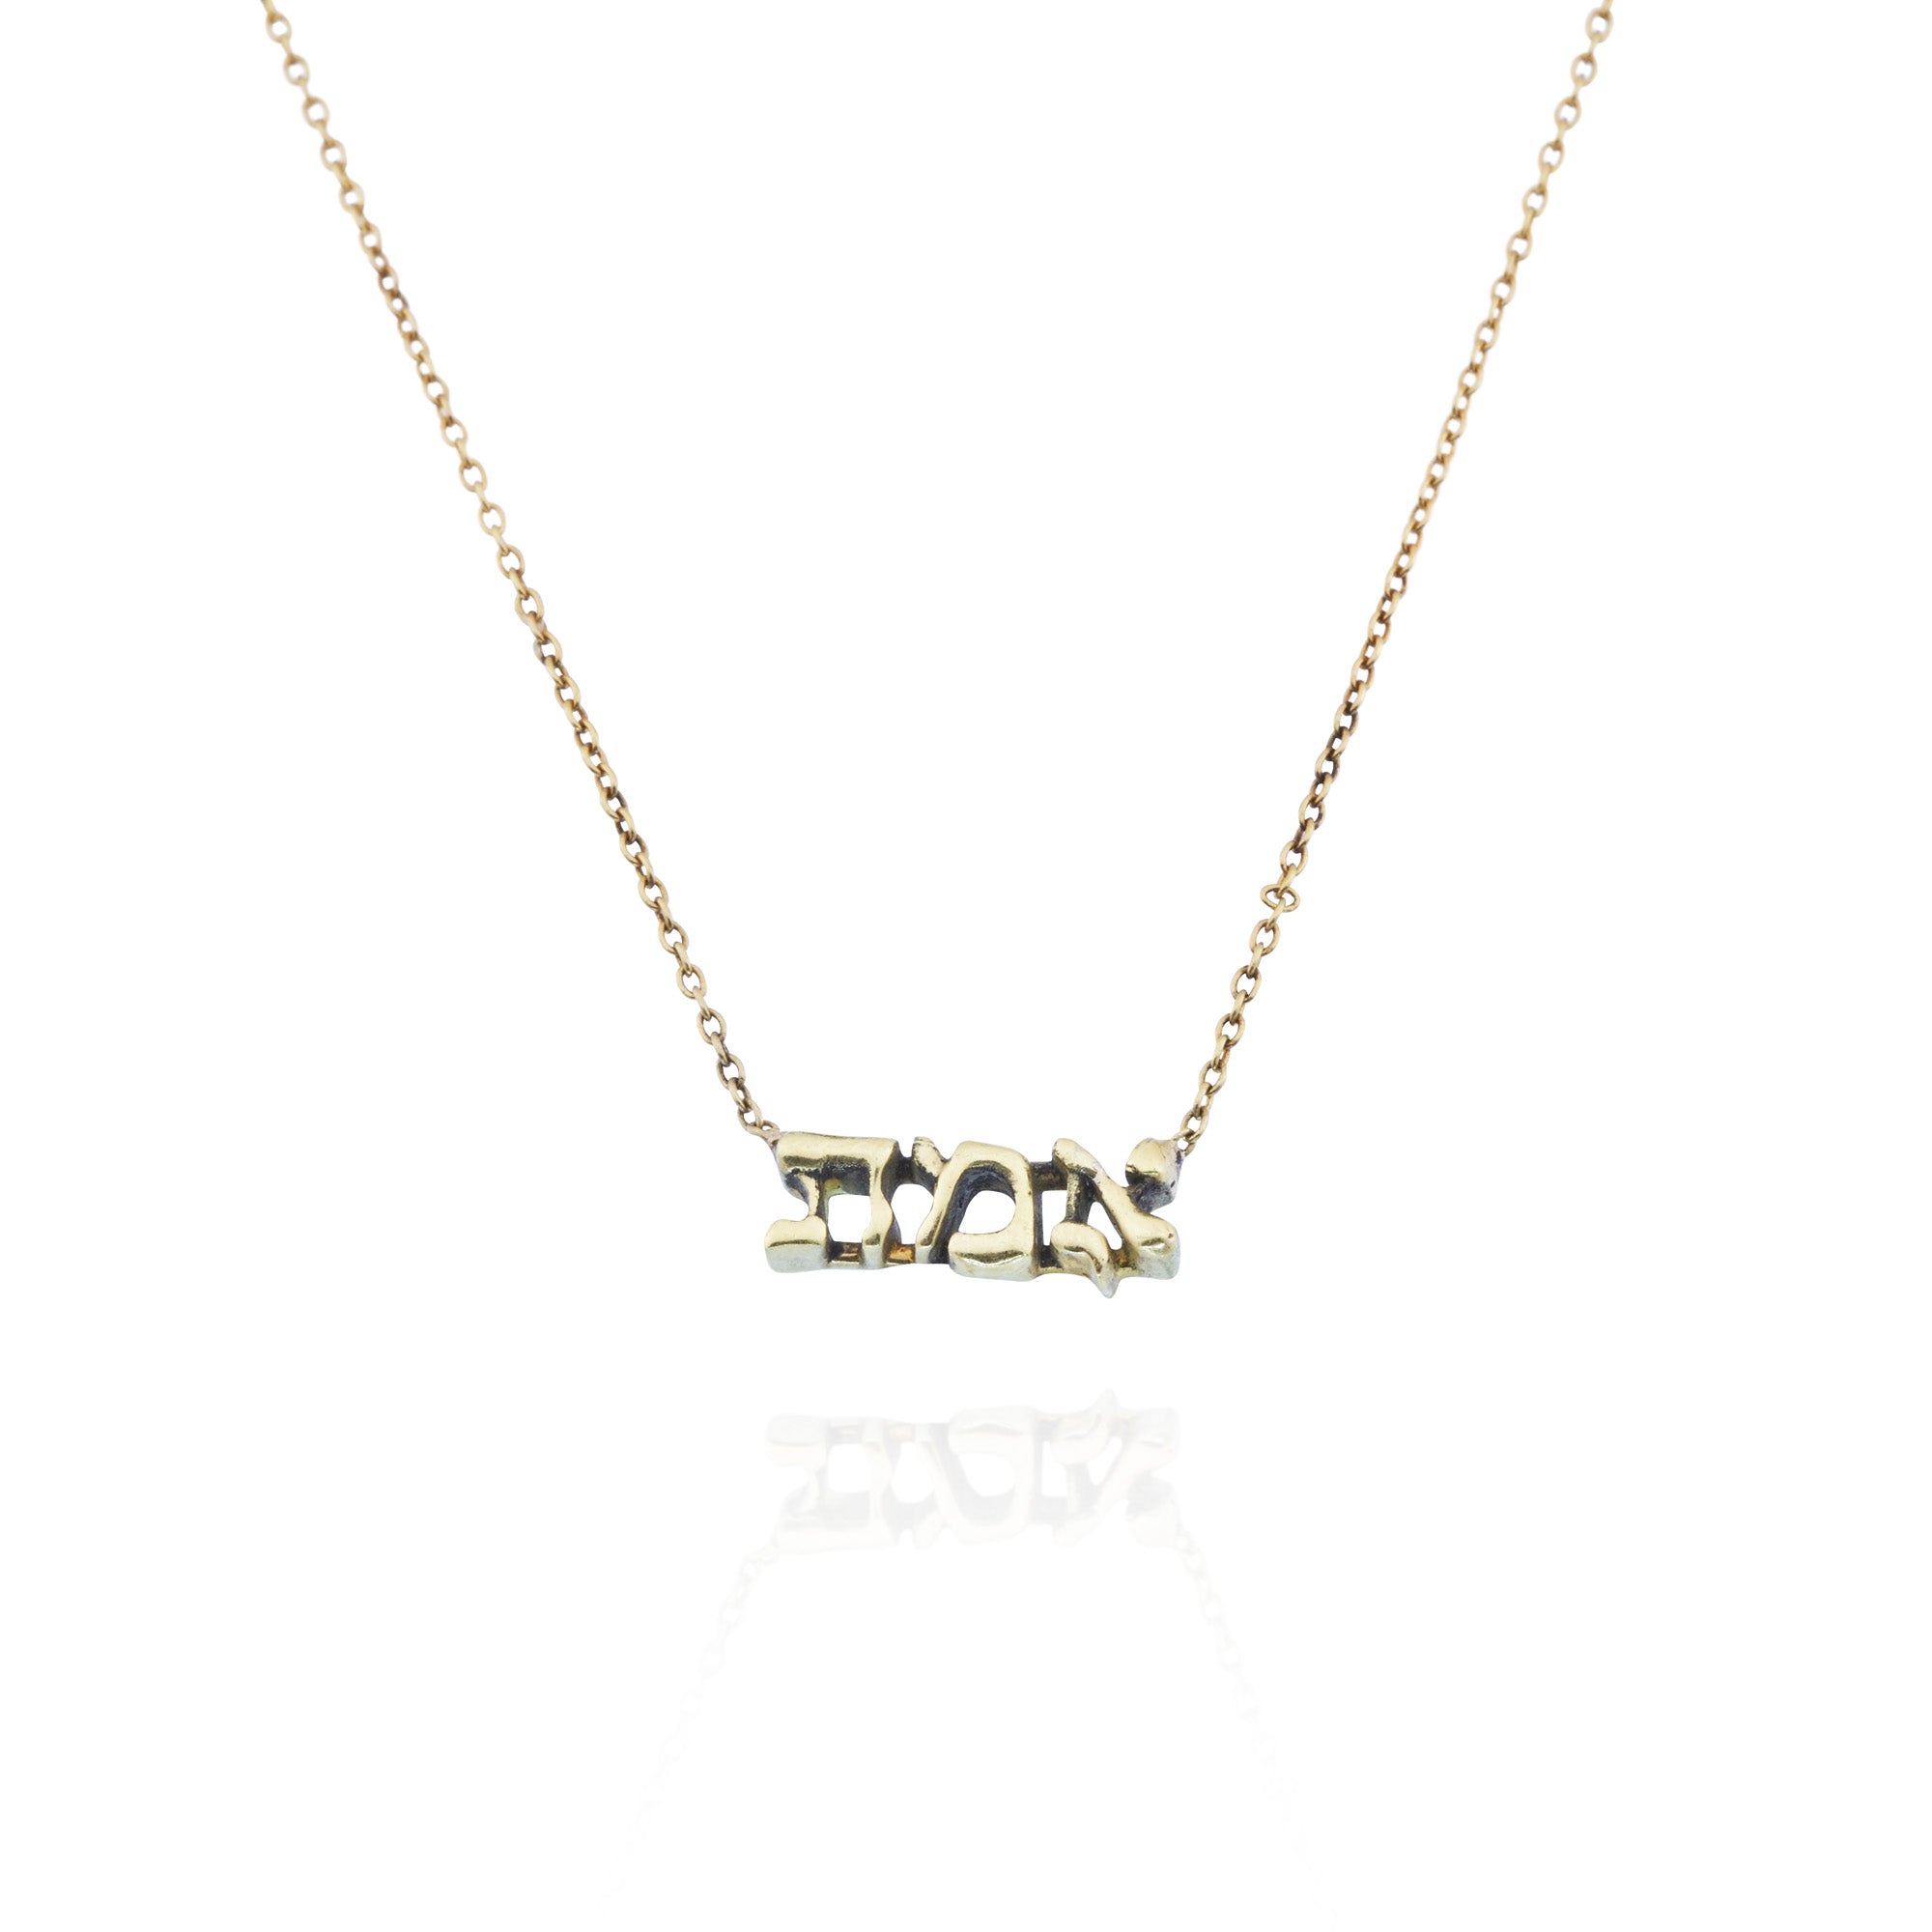 18kt Gold 'Truth' Necklace